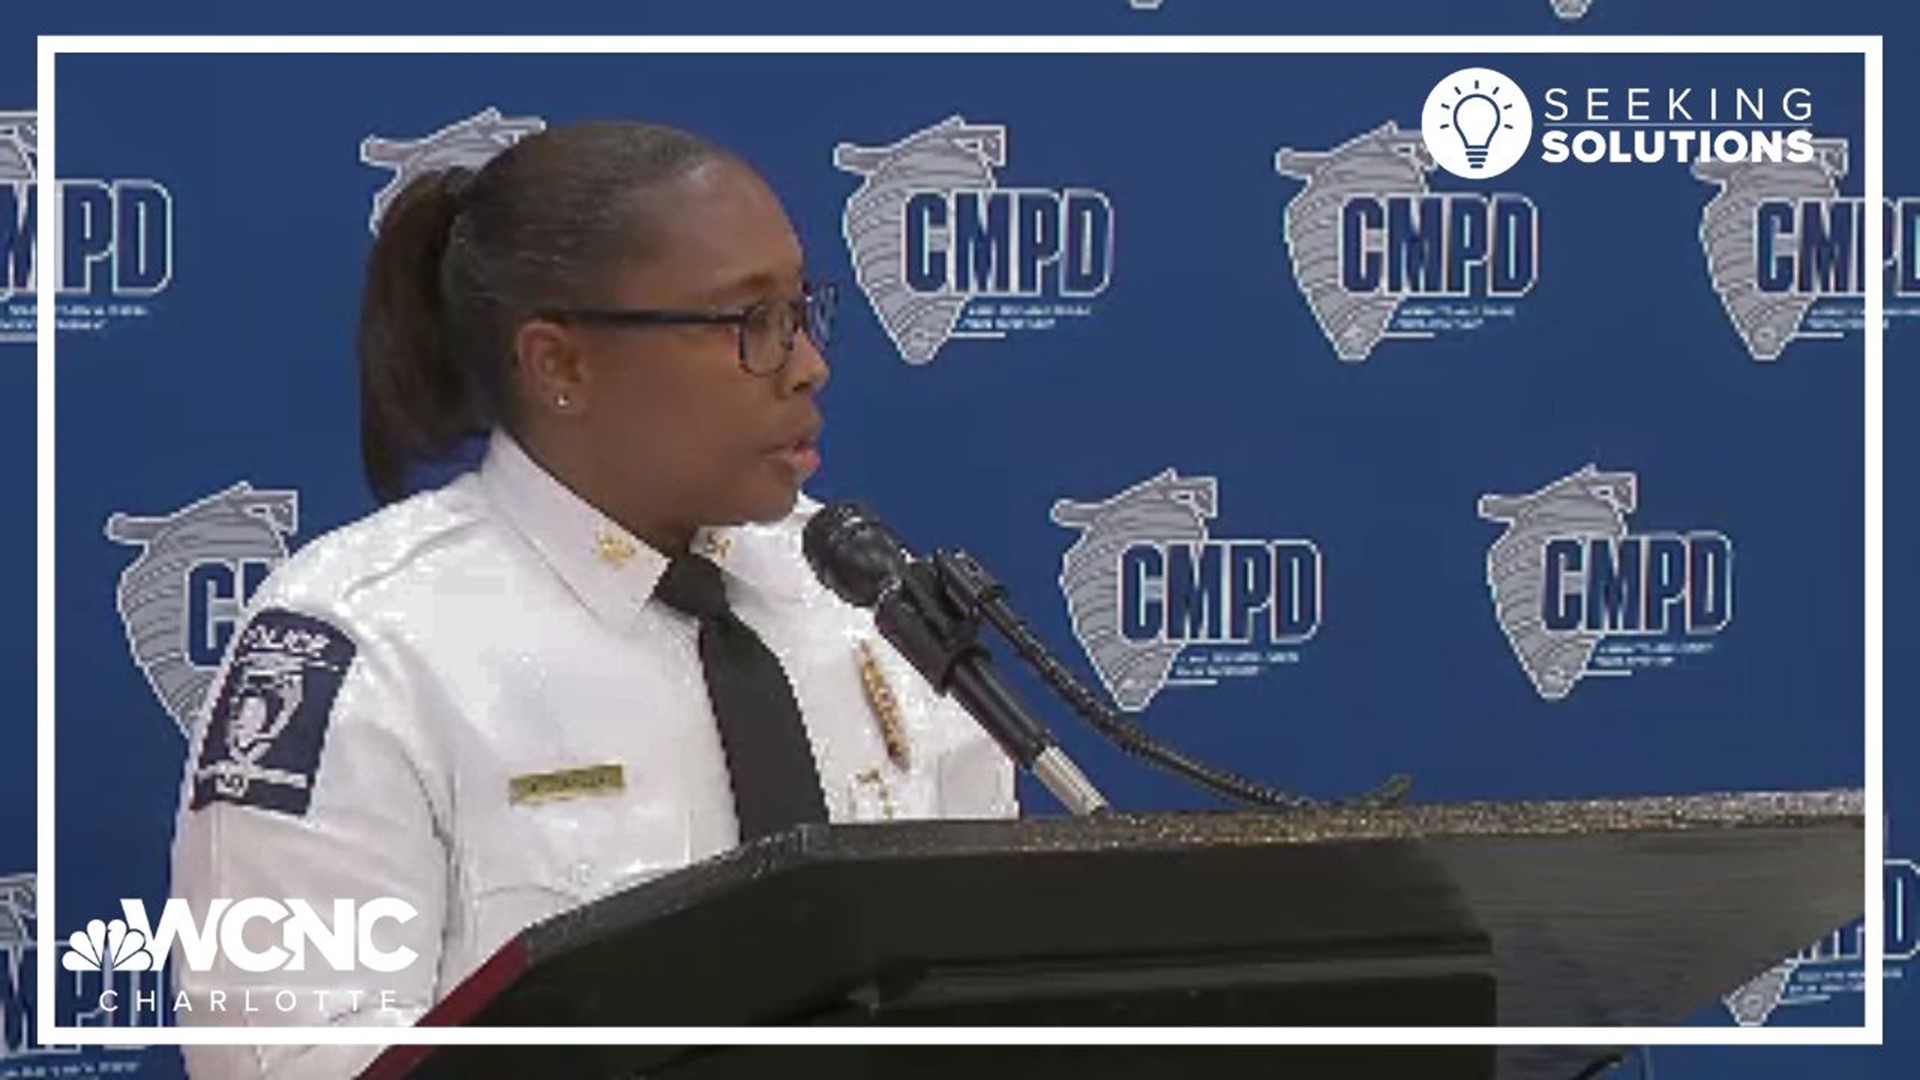 Changes include a dedicated de-escalation addendum to existing policy, improving early intervention reporting and slowing down police interactions.